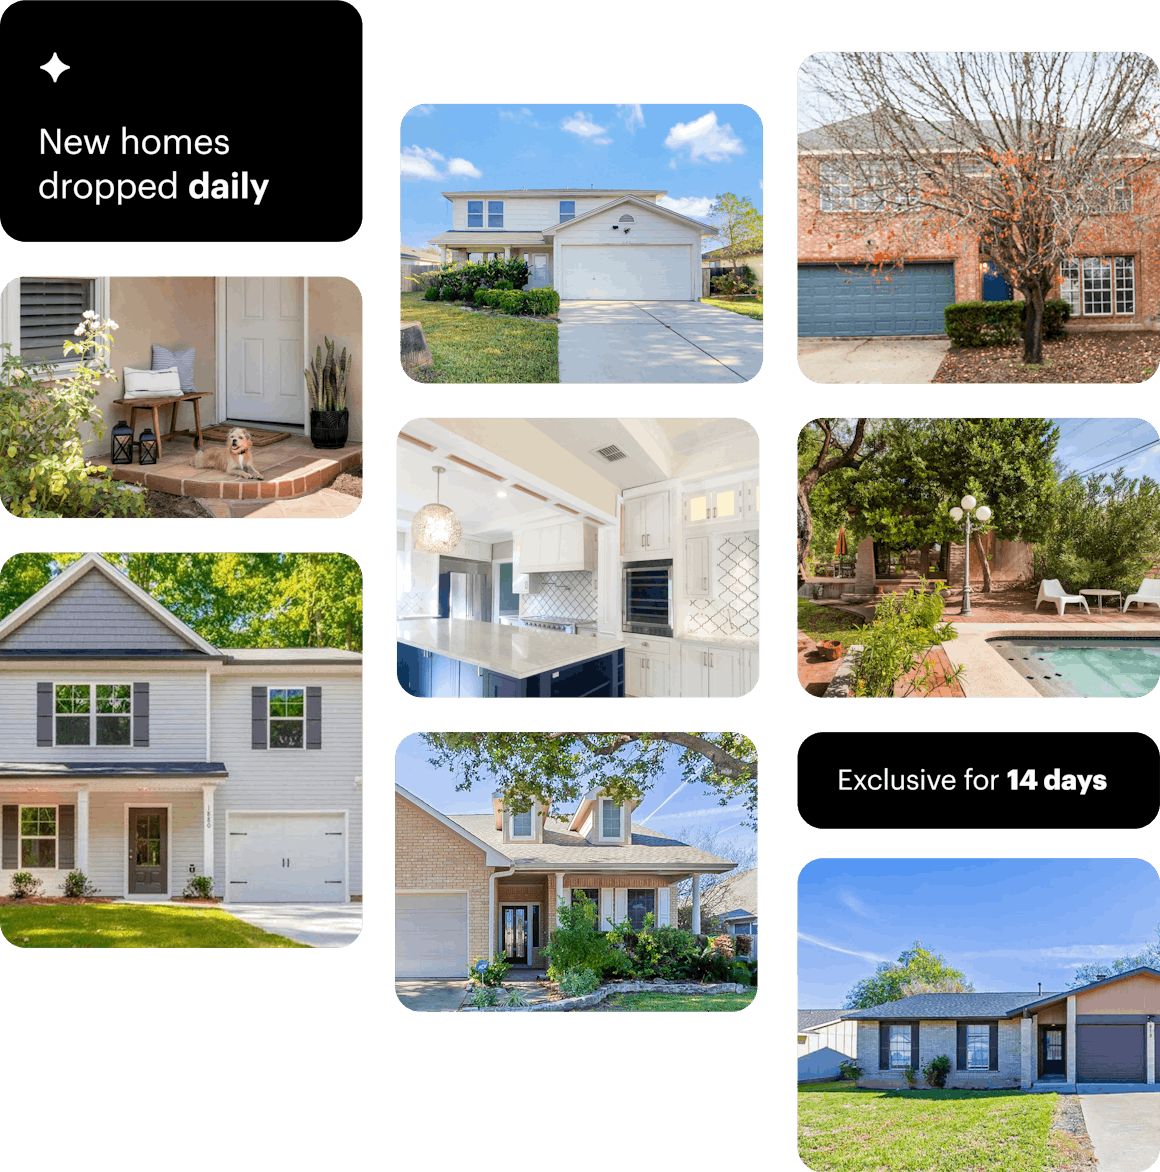 Various styles of Opendoor exclusive homes. New homes get dropped daily and are exclusive to Opendoor for 14 days.